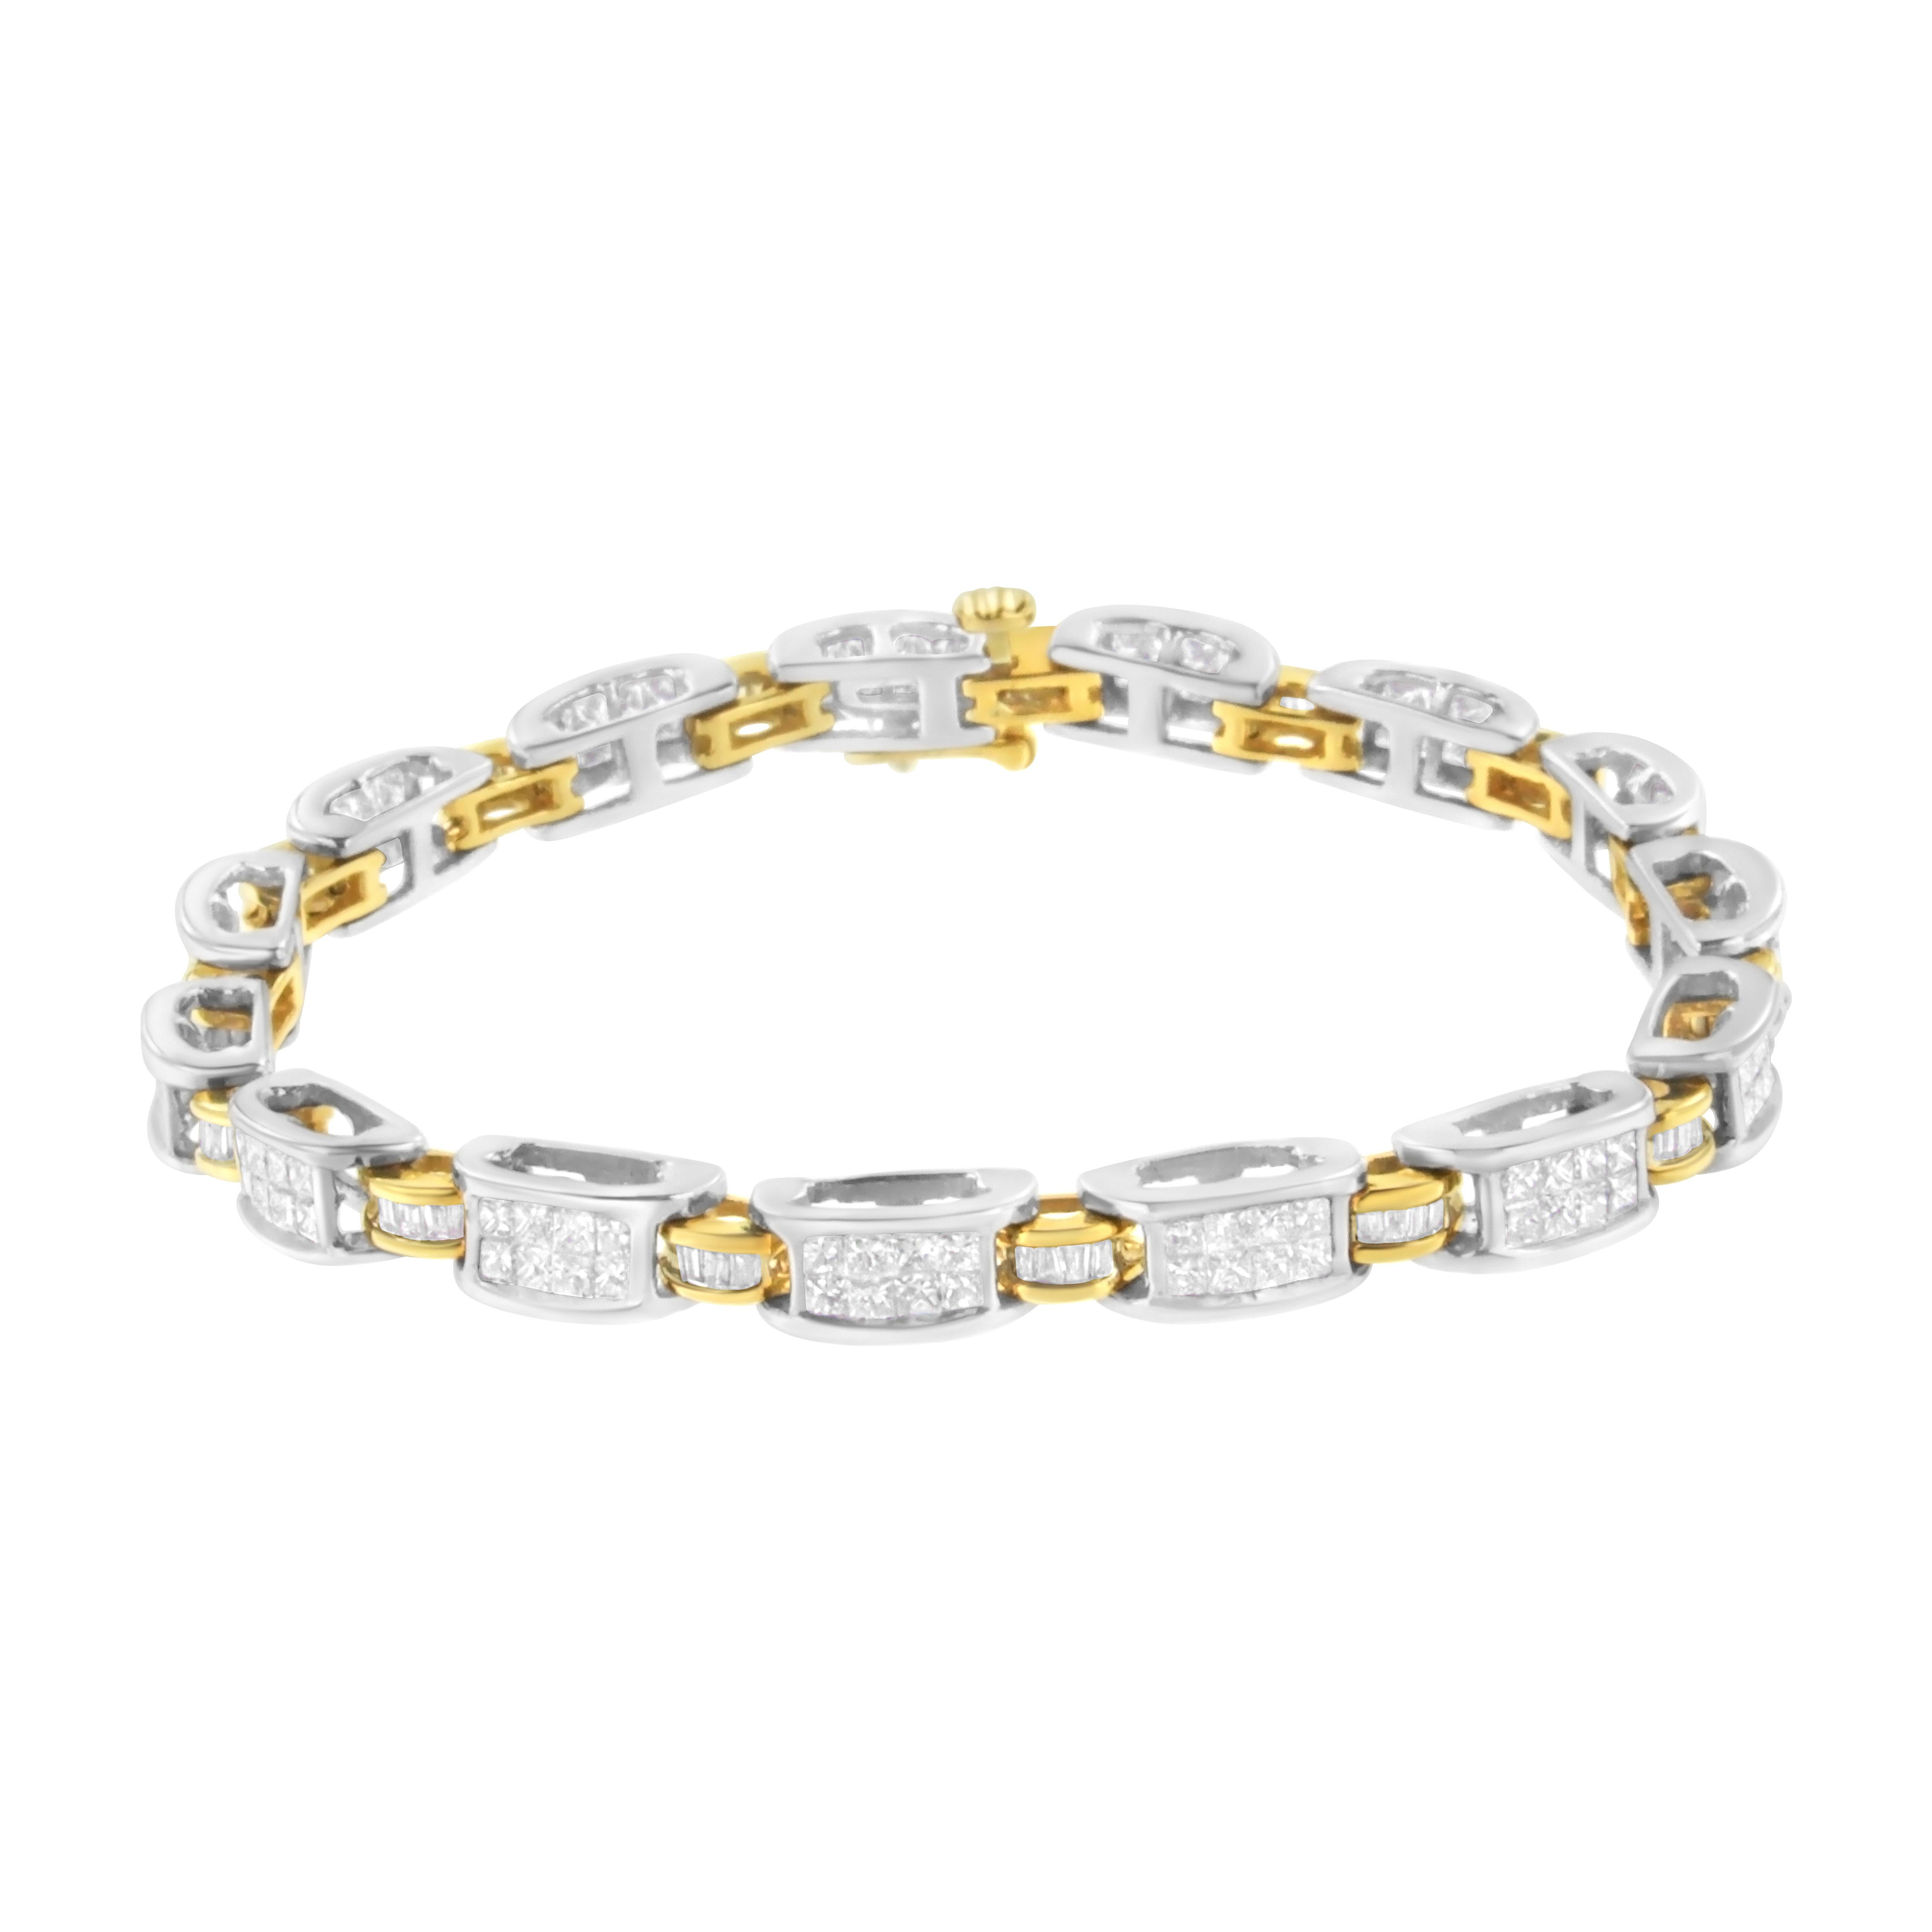 Bump up your personal style with the handsome look of this two-tone bracelet. The bracelet features diamonds cut in rare baguette cut for added spark. Diamond links are encased in a 14k yellow gold casing that keeps it from snagging on clothing. The